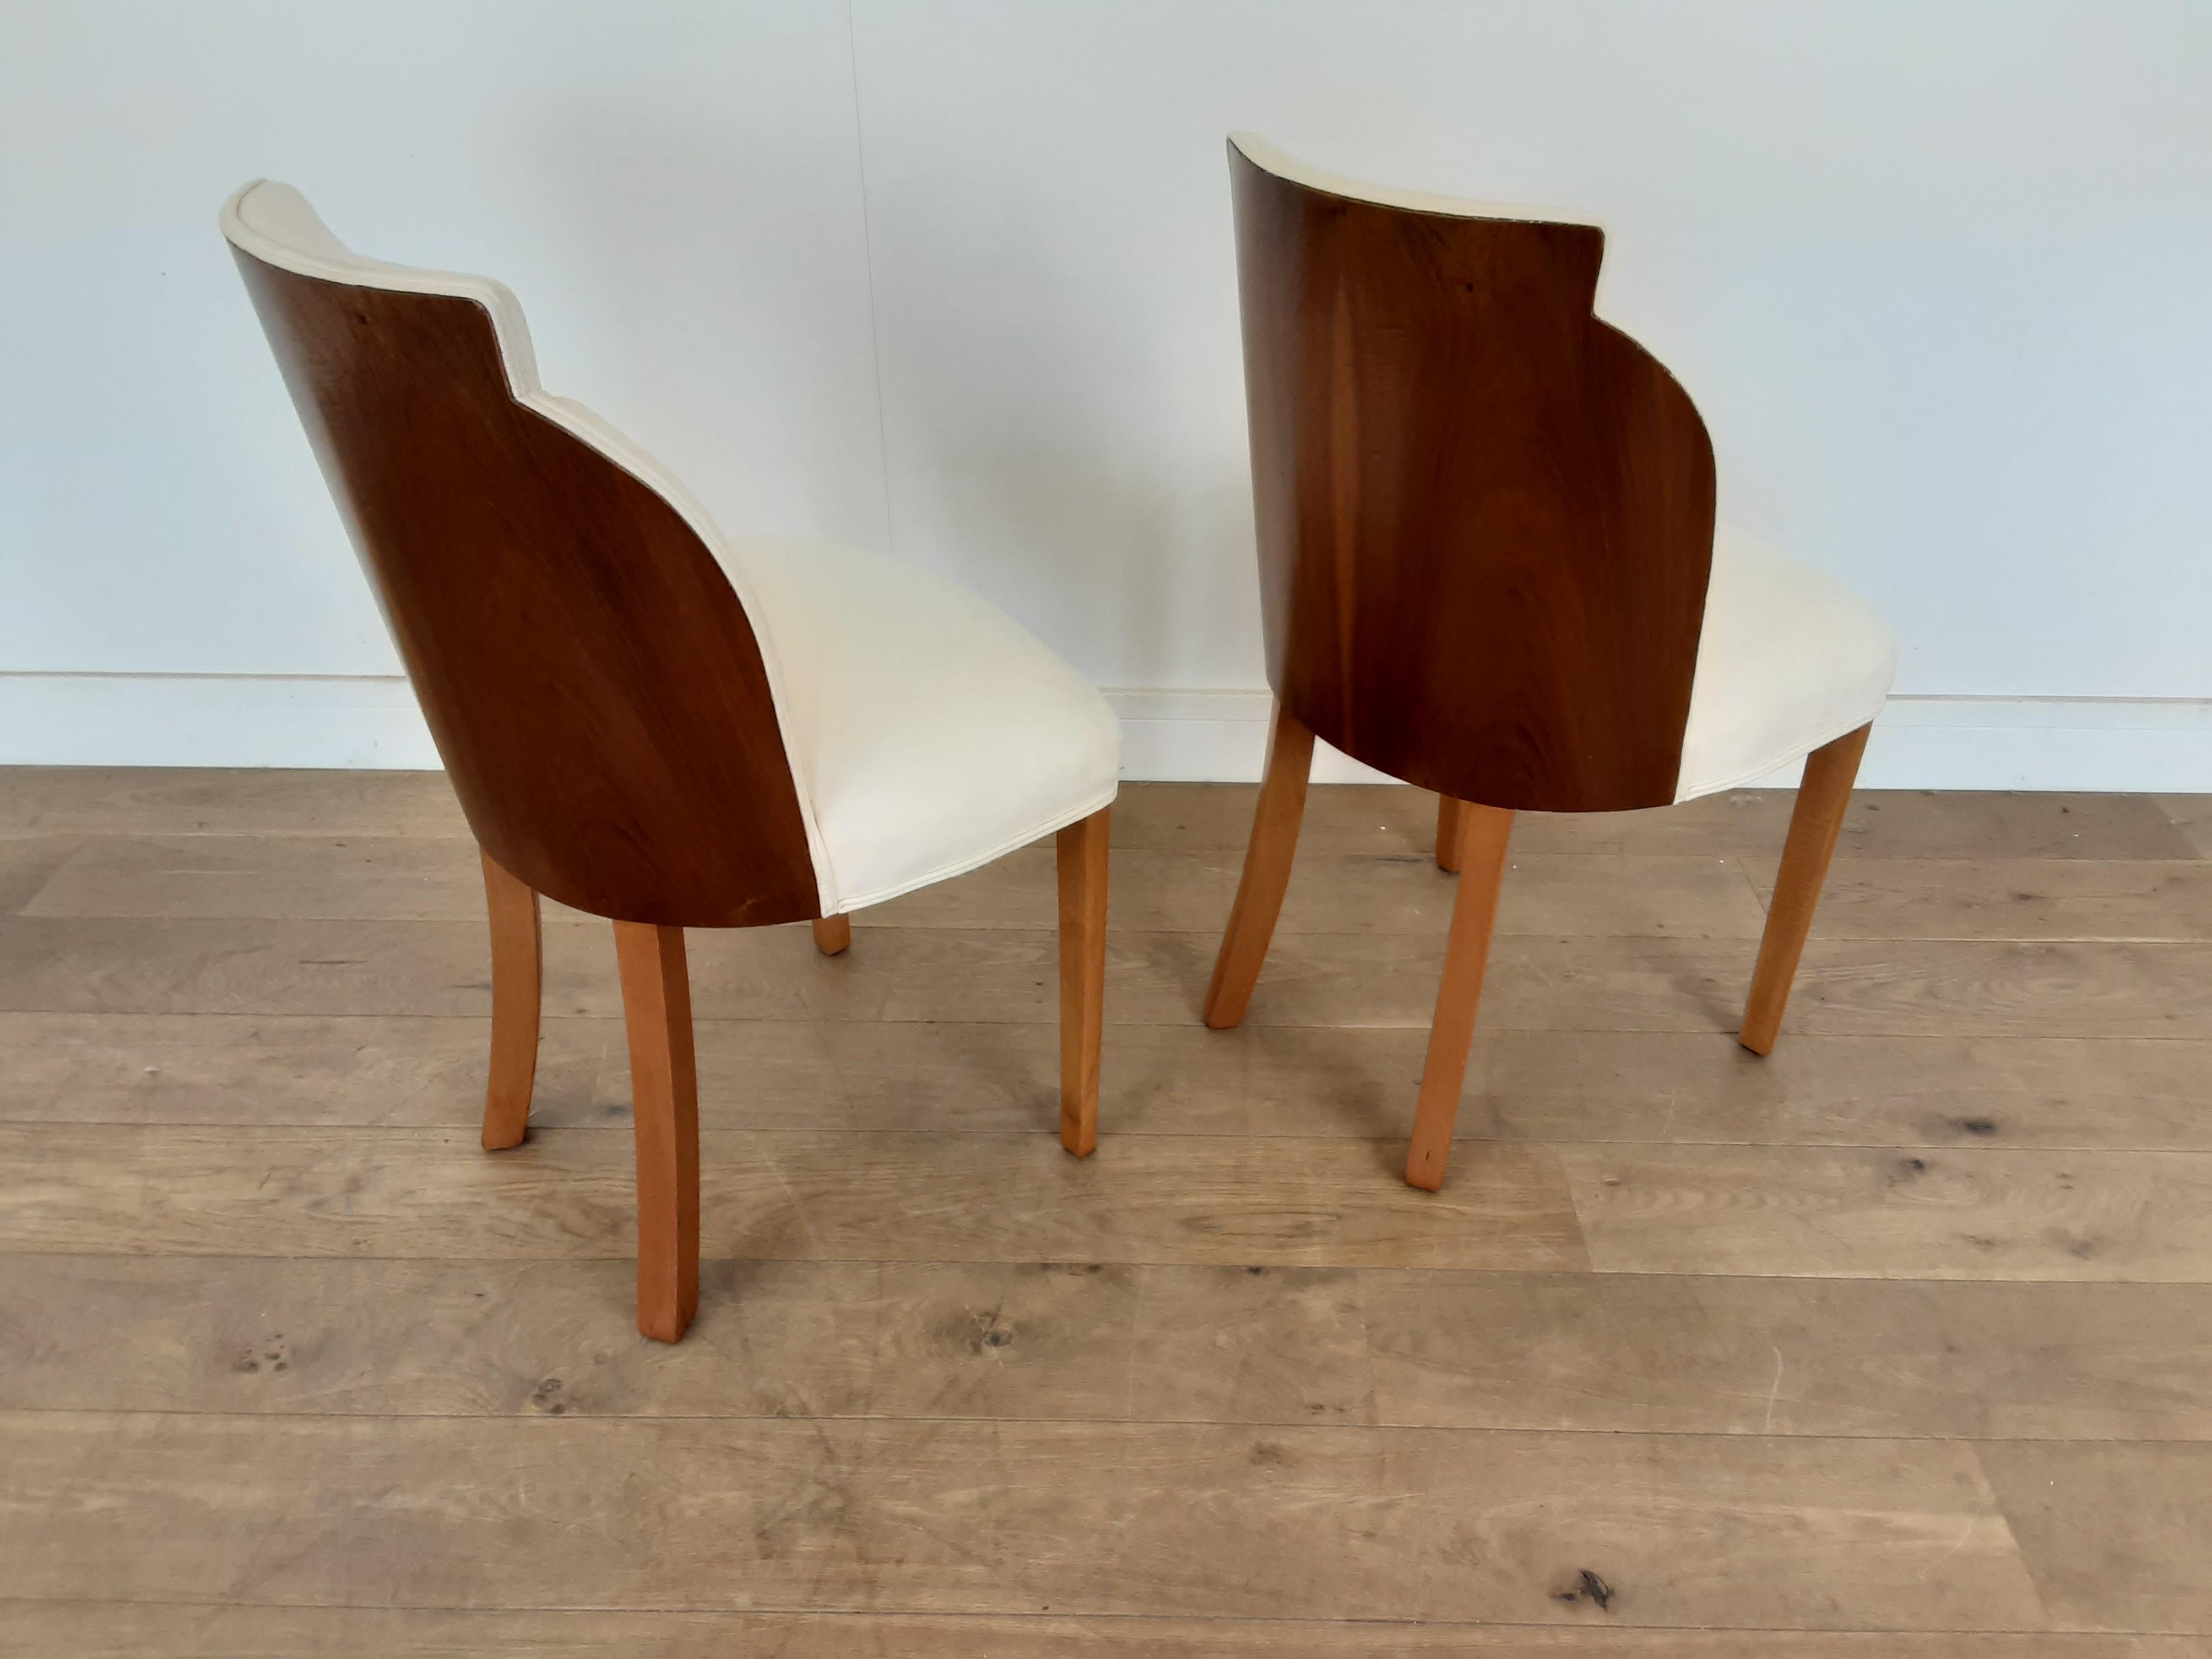 Pair of Art Deco Cloud Back Chairs in Walnut by Epstein, circa 1930 For Sale 1